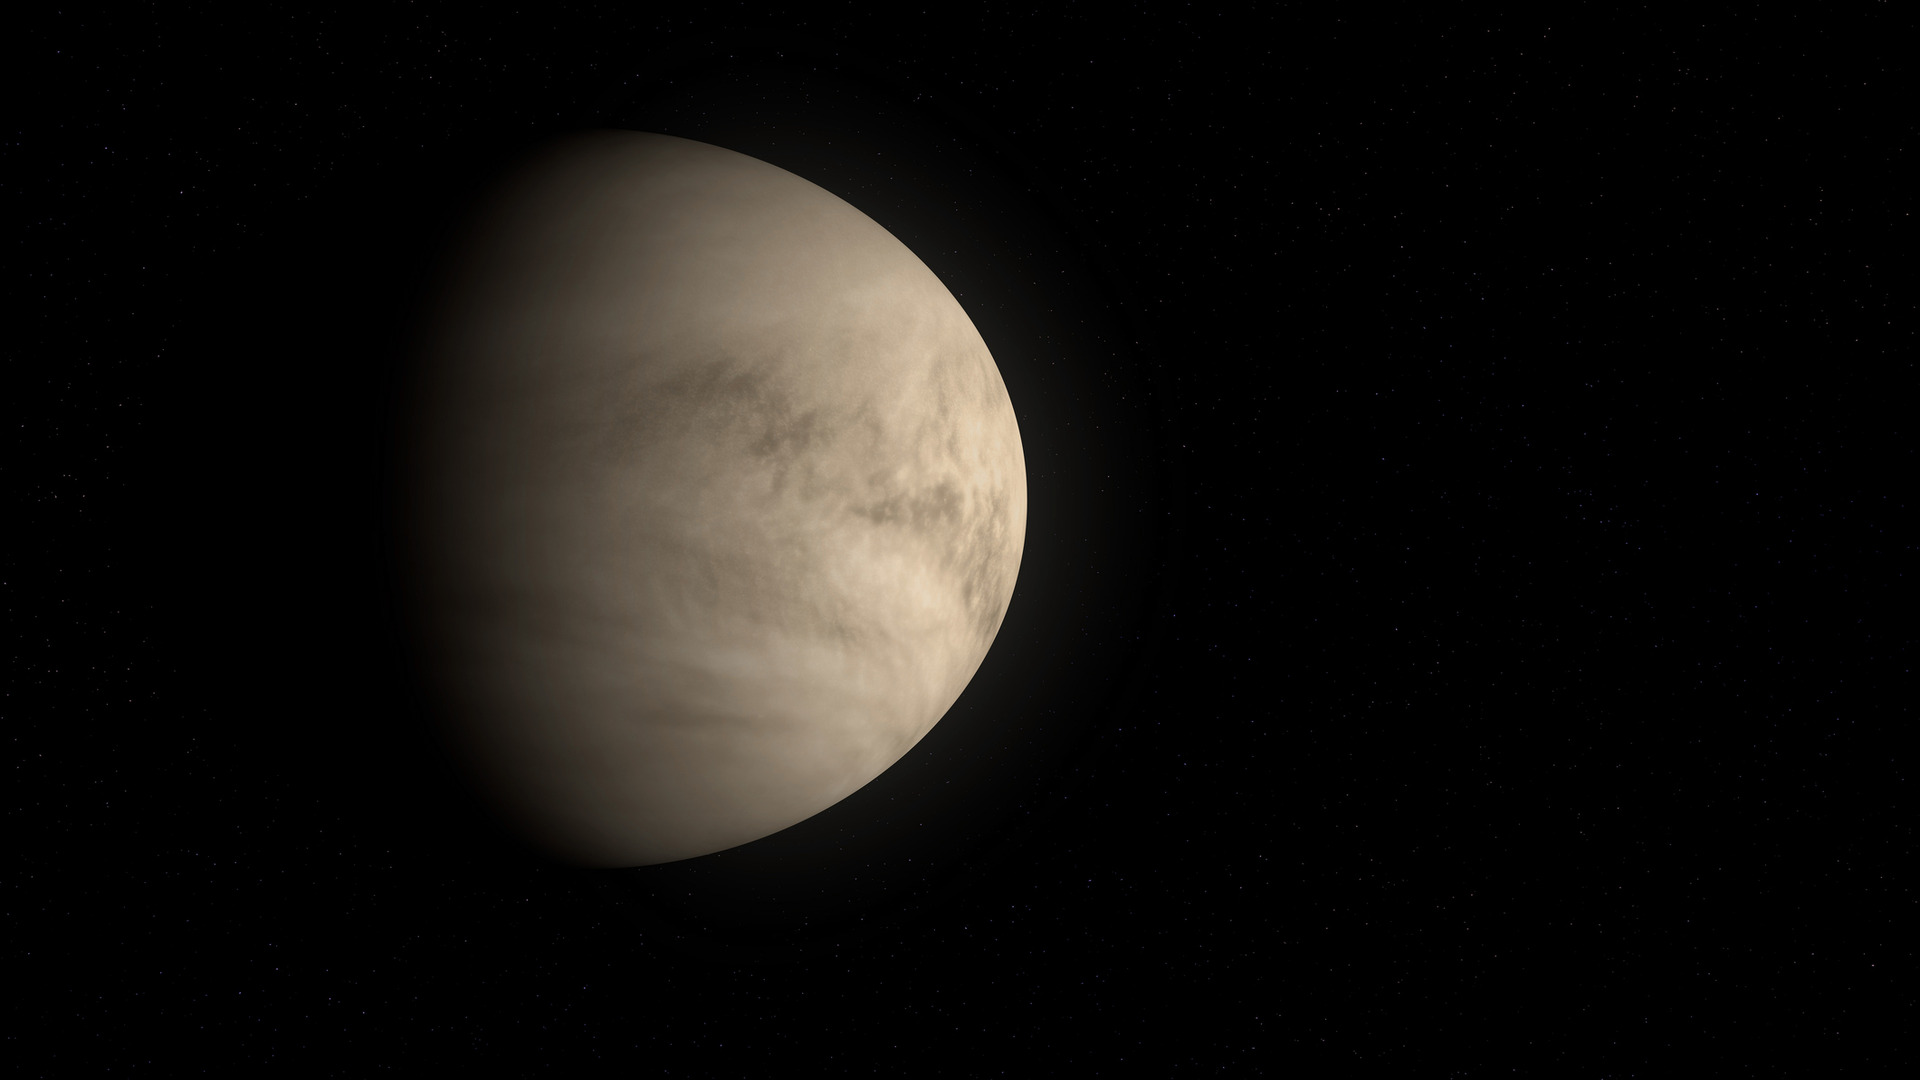 Venus is waterless due to greenhouse effect, indicating Earth